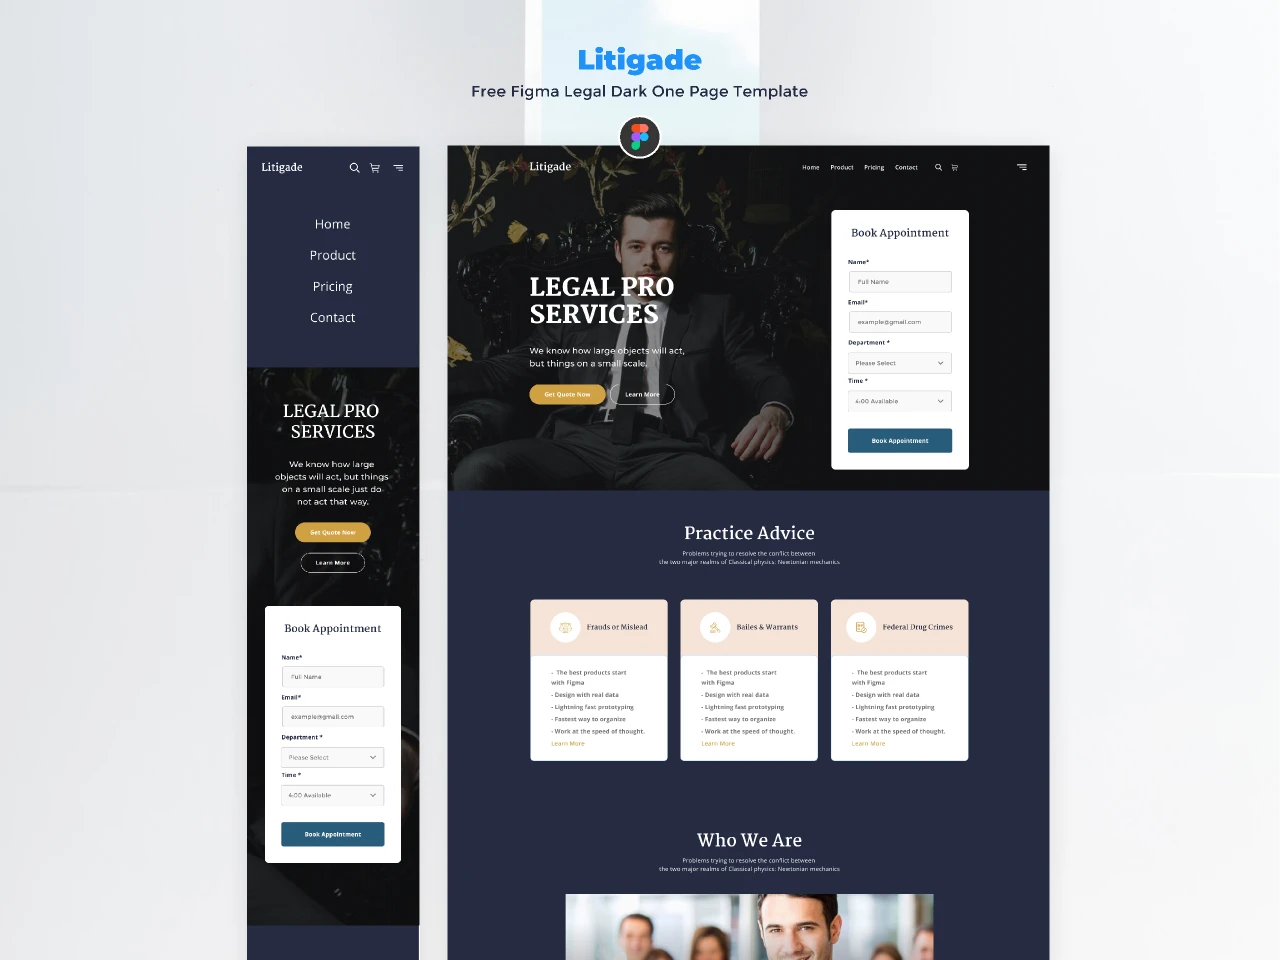 Litigade - Free Figma Legal Dark One Page Template for Figma and Adobe XD